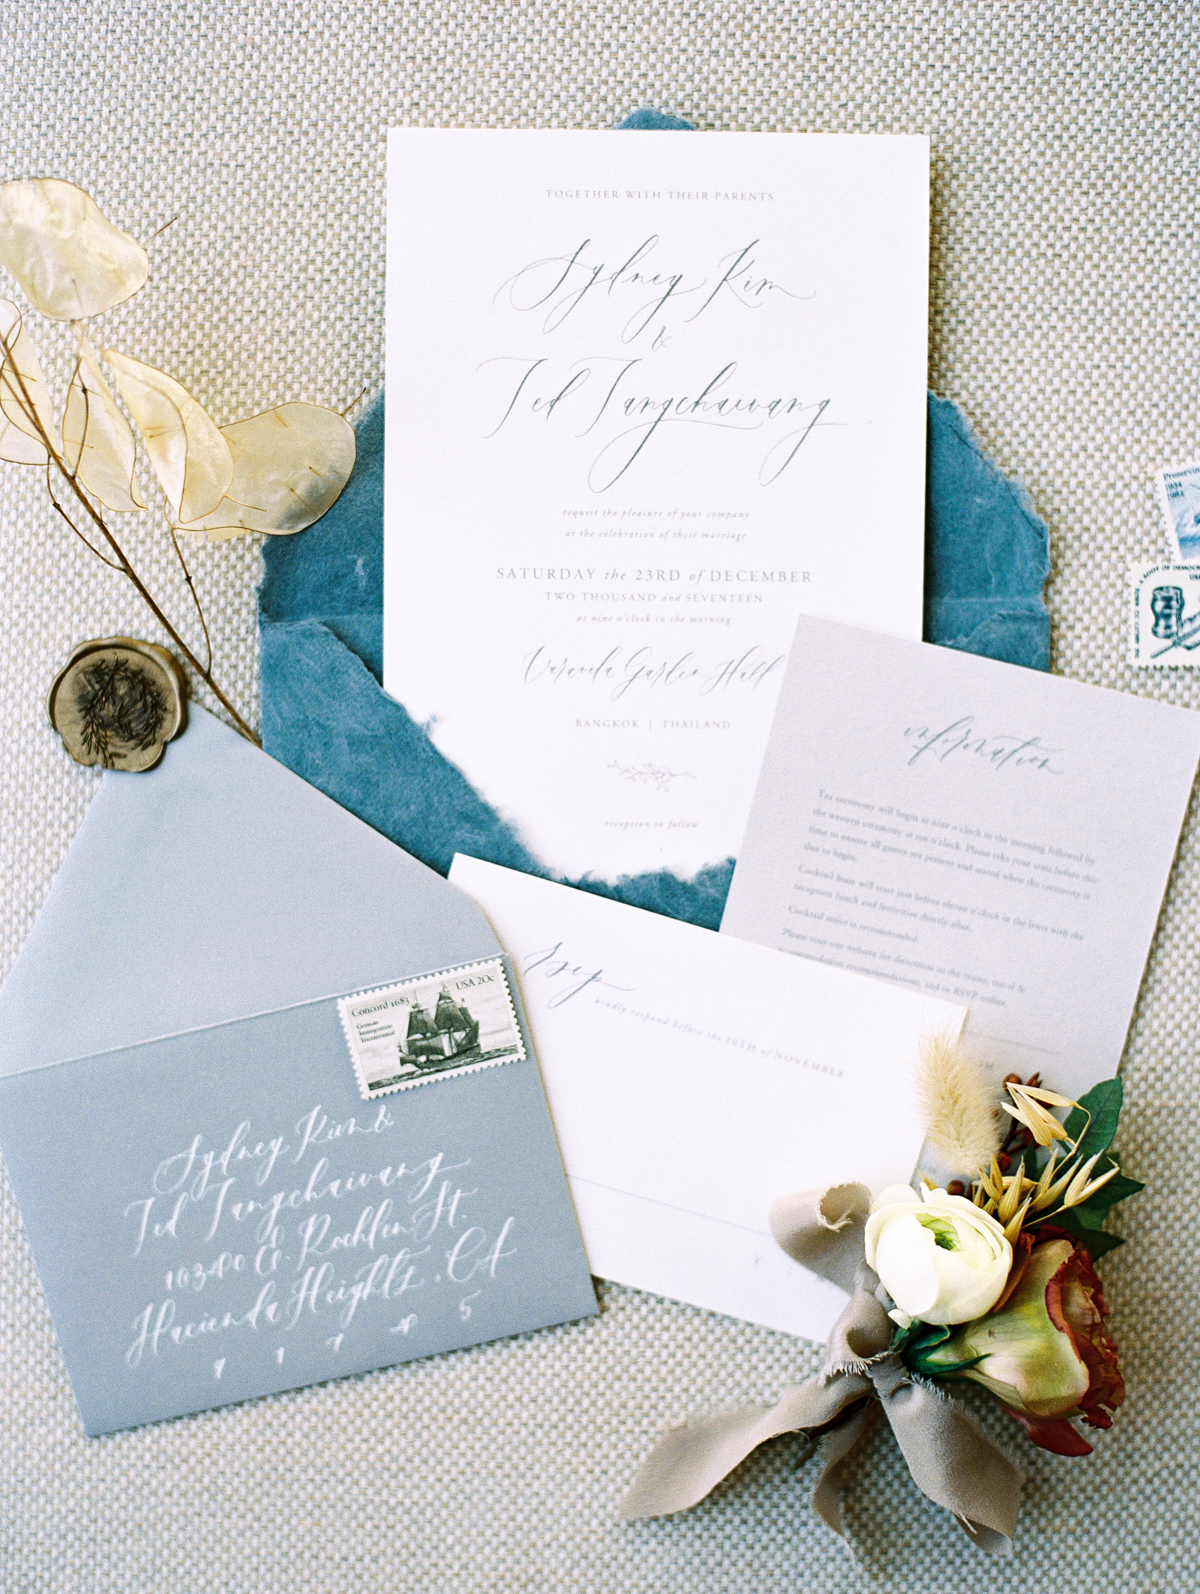 custom invitation suite with floral details